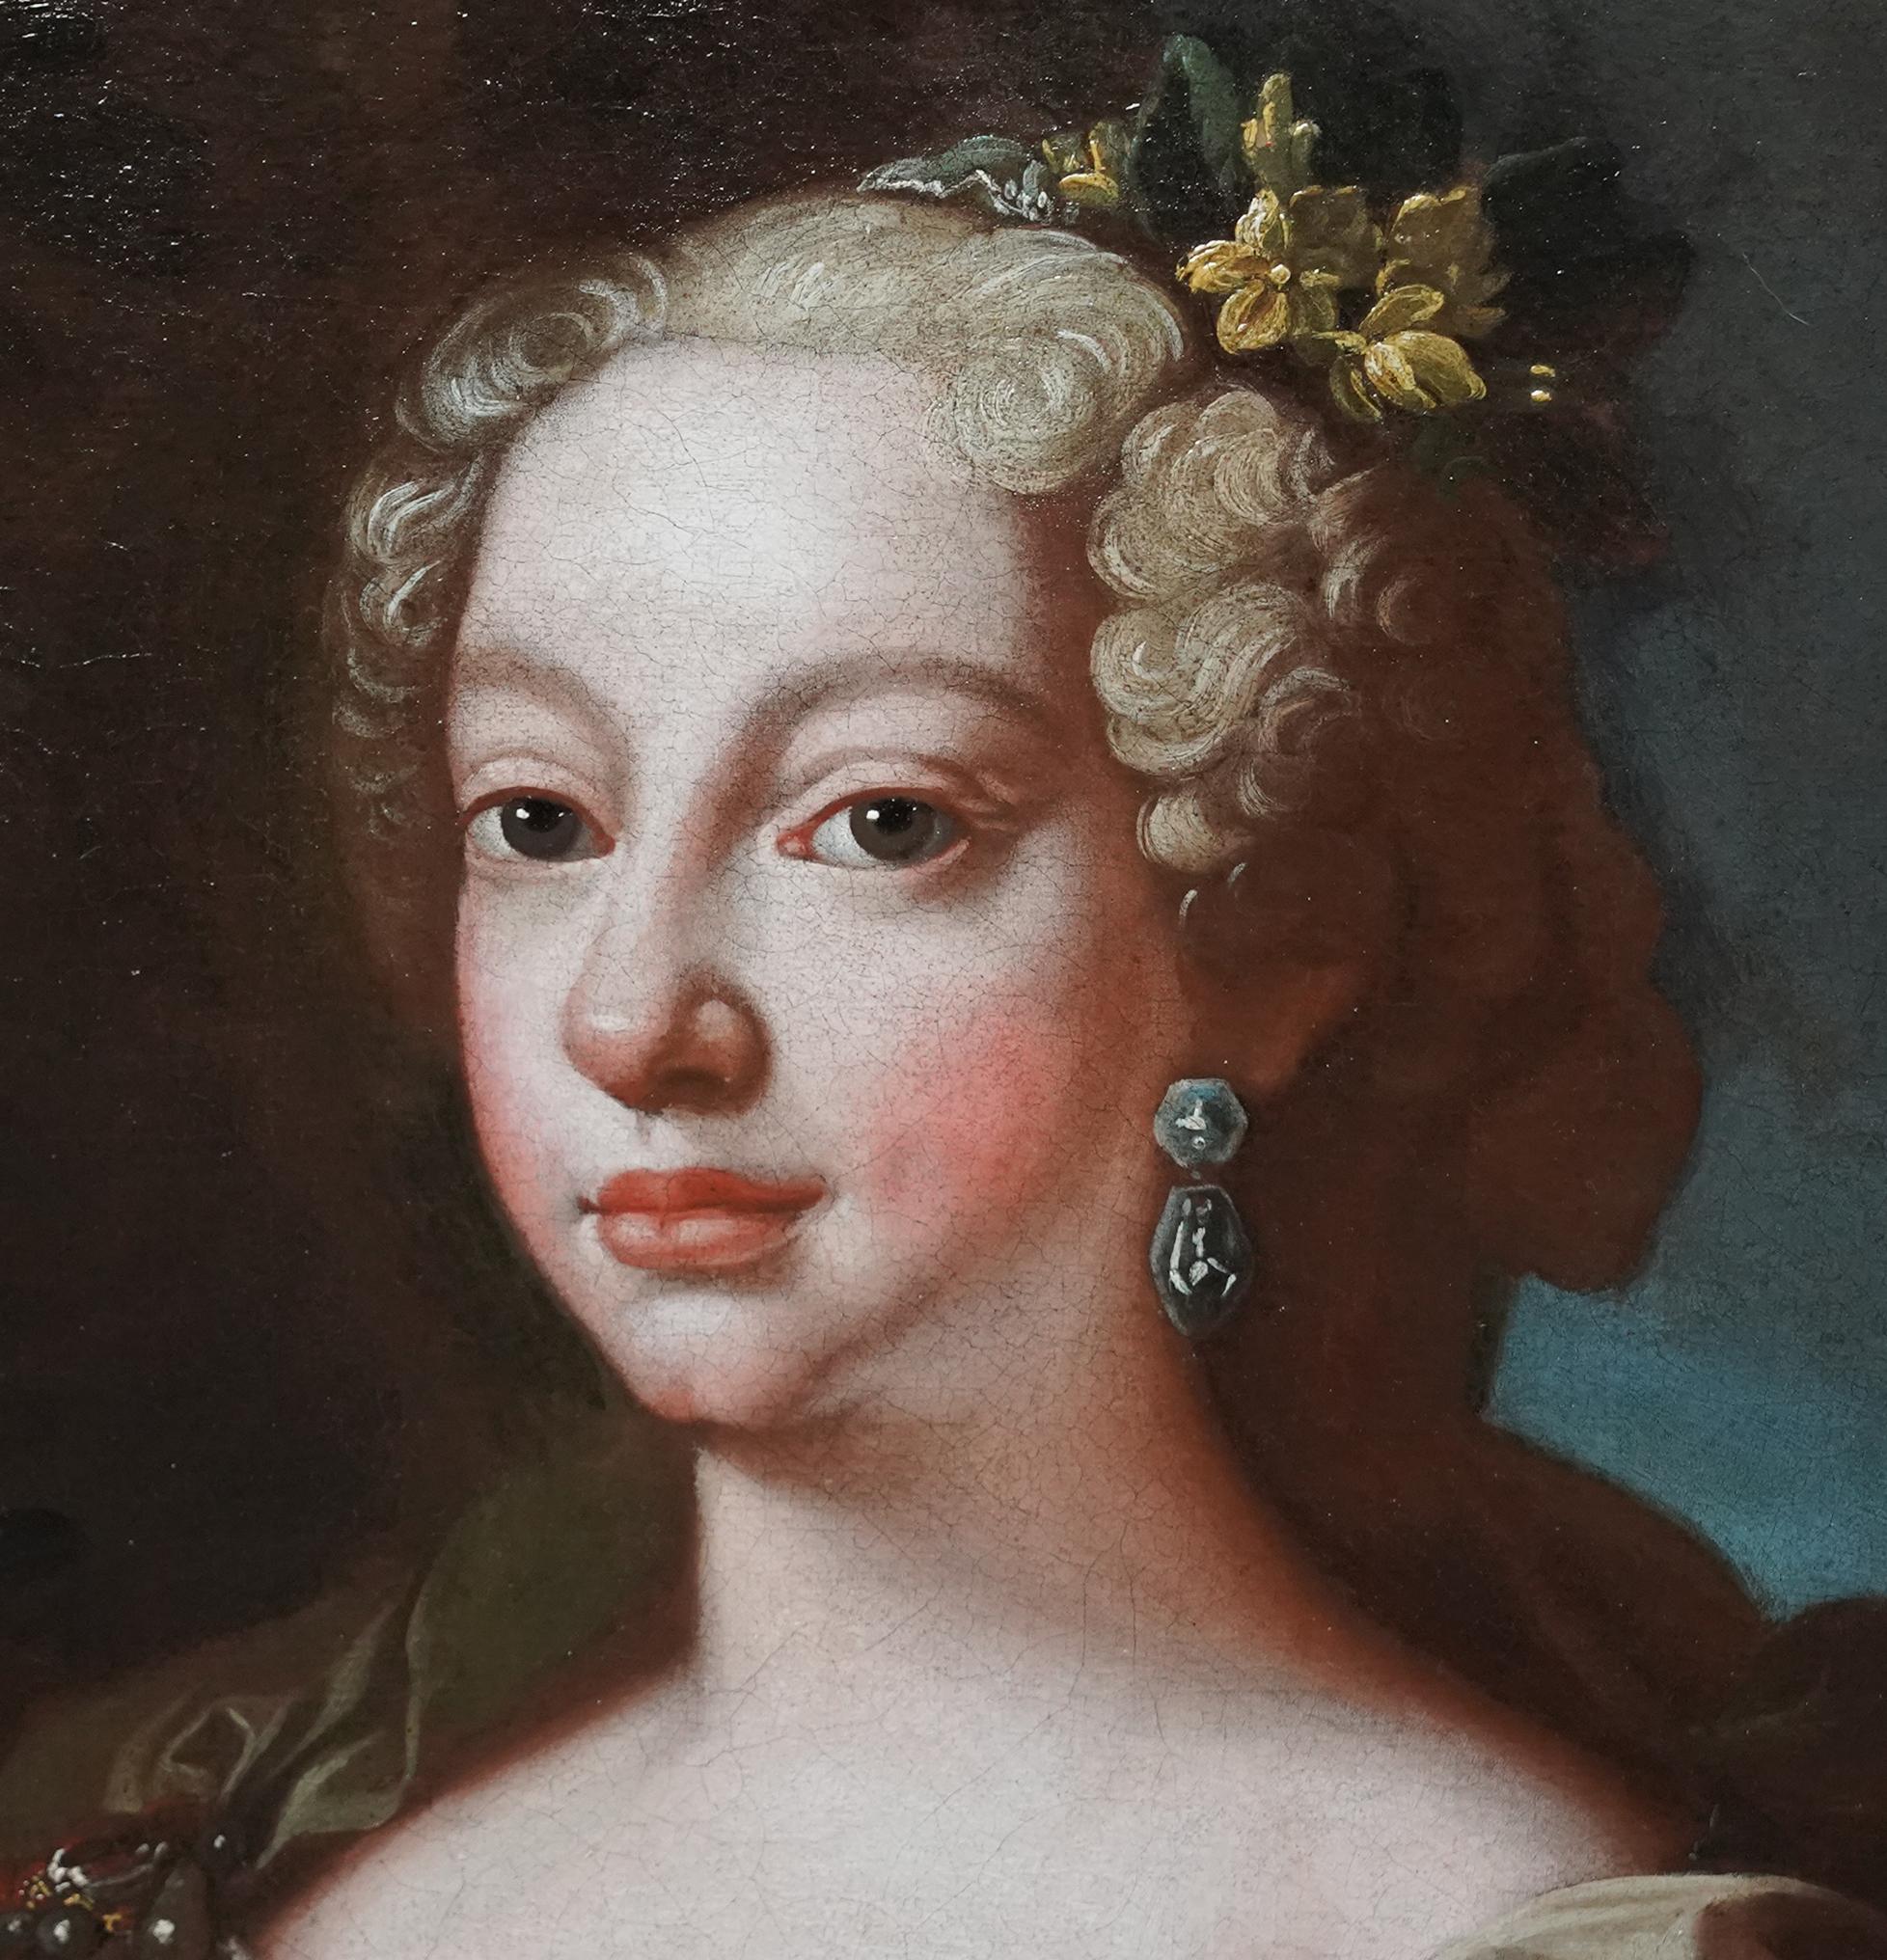 This lovely Italian Old Master portrait oil painting is by Domenico Maria Sani. Painted circa 1732 the sitter is of Maria Anna Vittoria (1718 - 1788),  daughter of Philip V and Elisabetta Farnese, who in 1729 married Joseph prince of Brazil and king